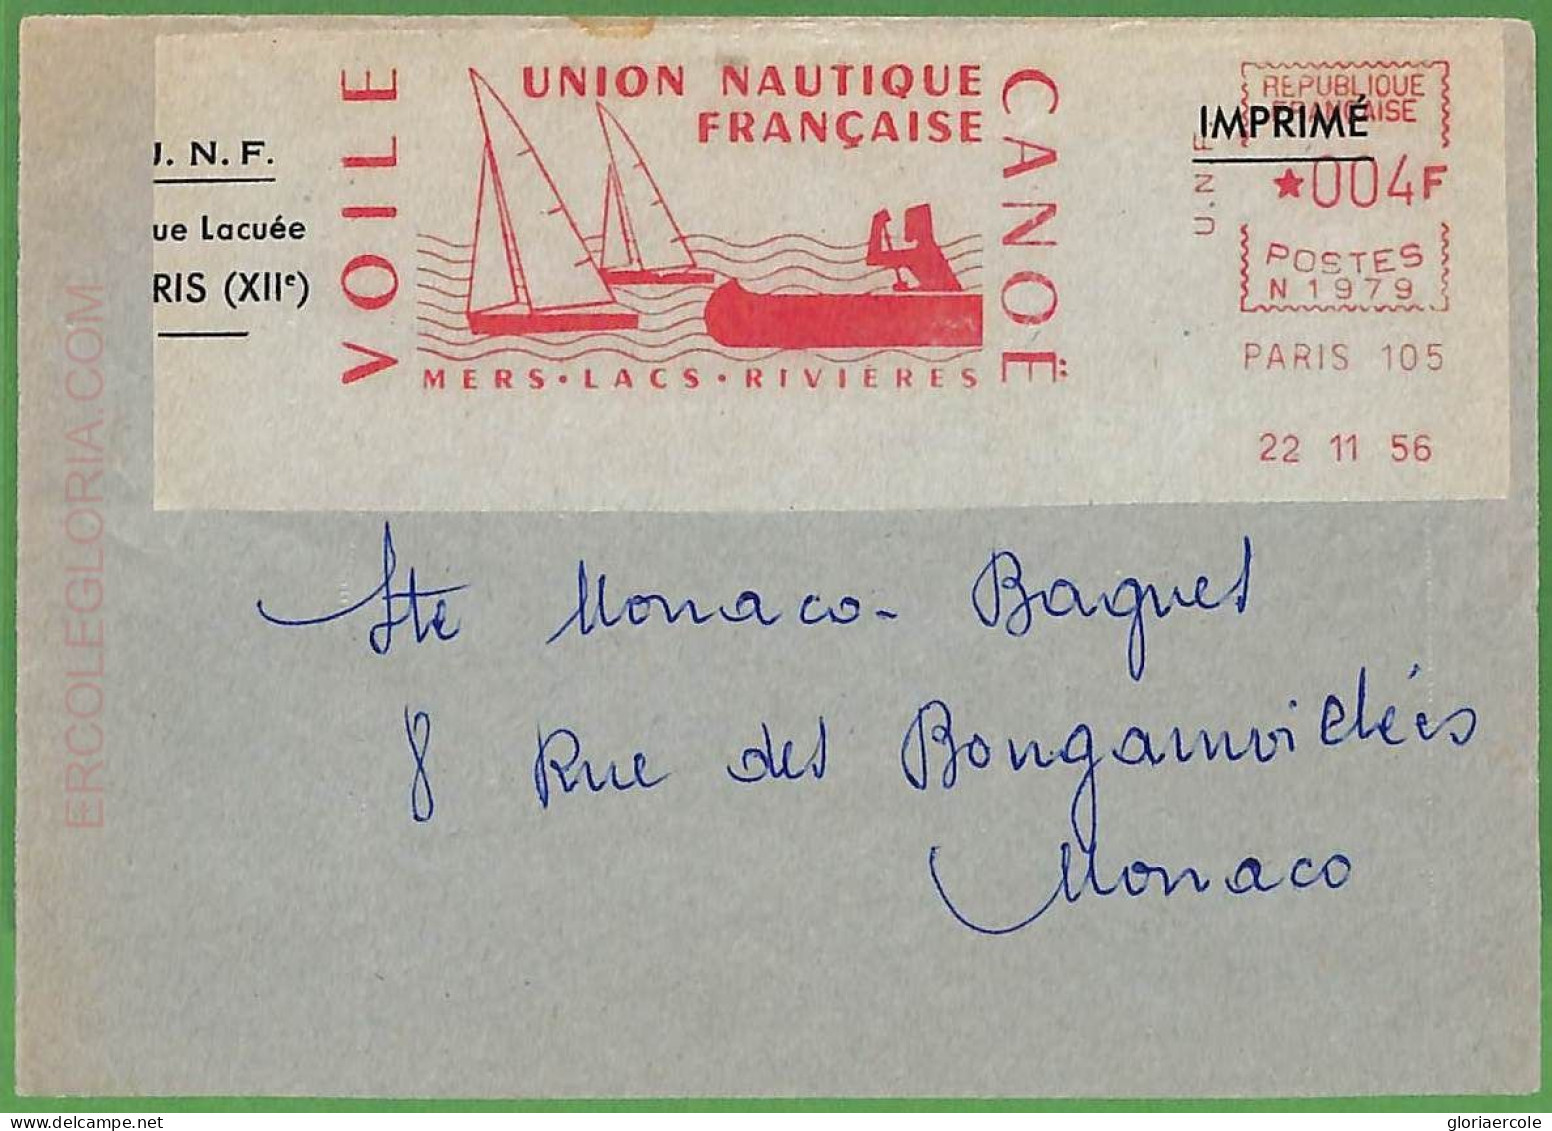 Af3737 - FRANCE - POSTAL HISTORY - Cover - ROWING Canoes - 1979 - Canoe